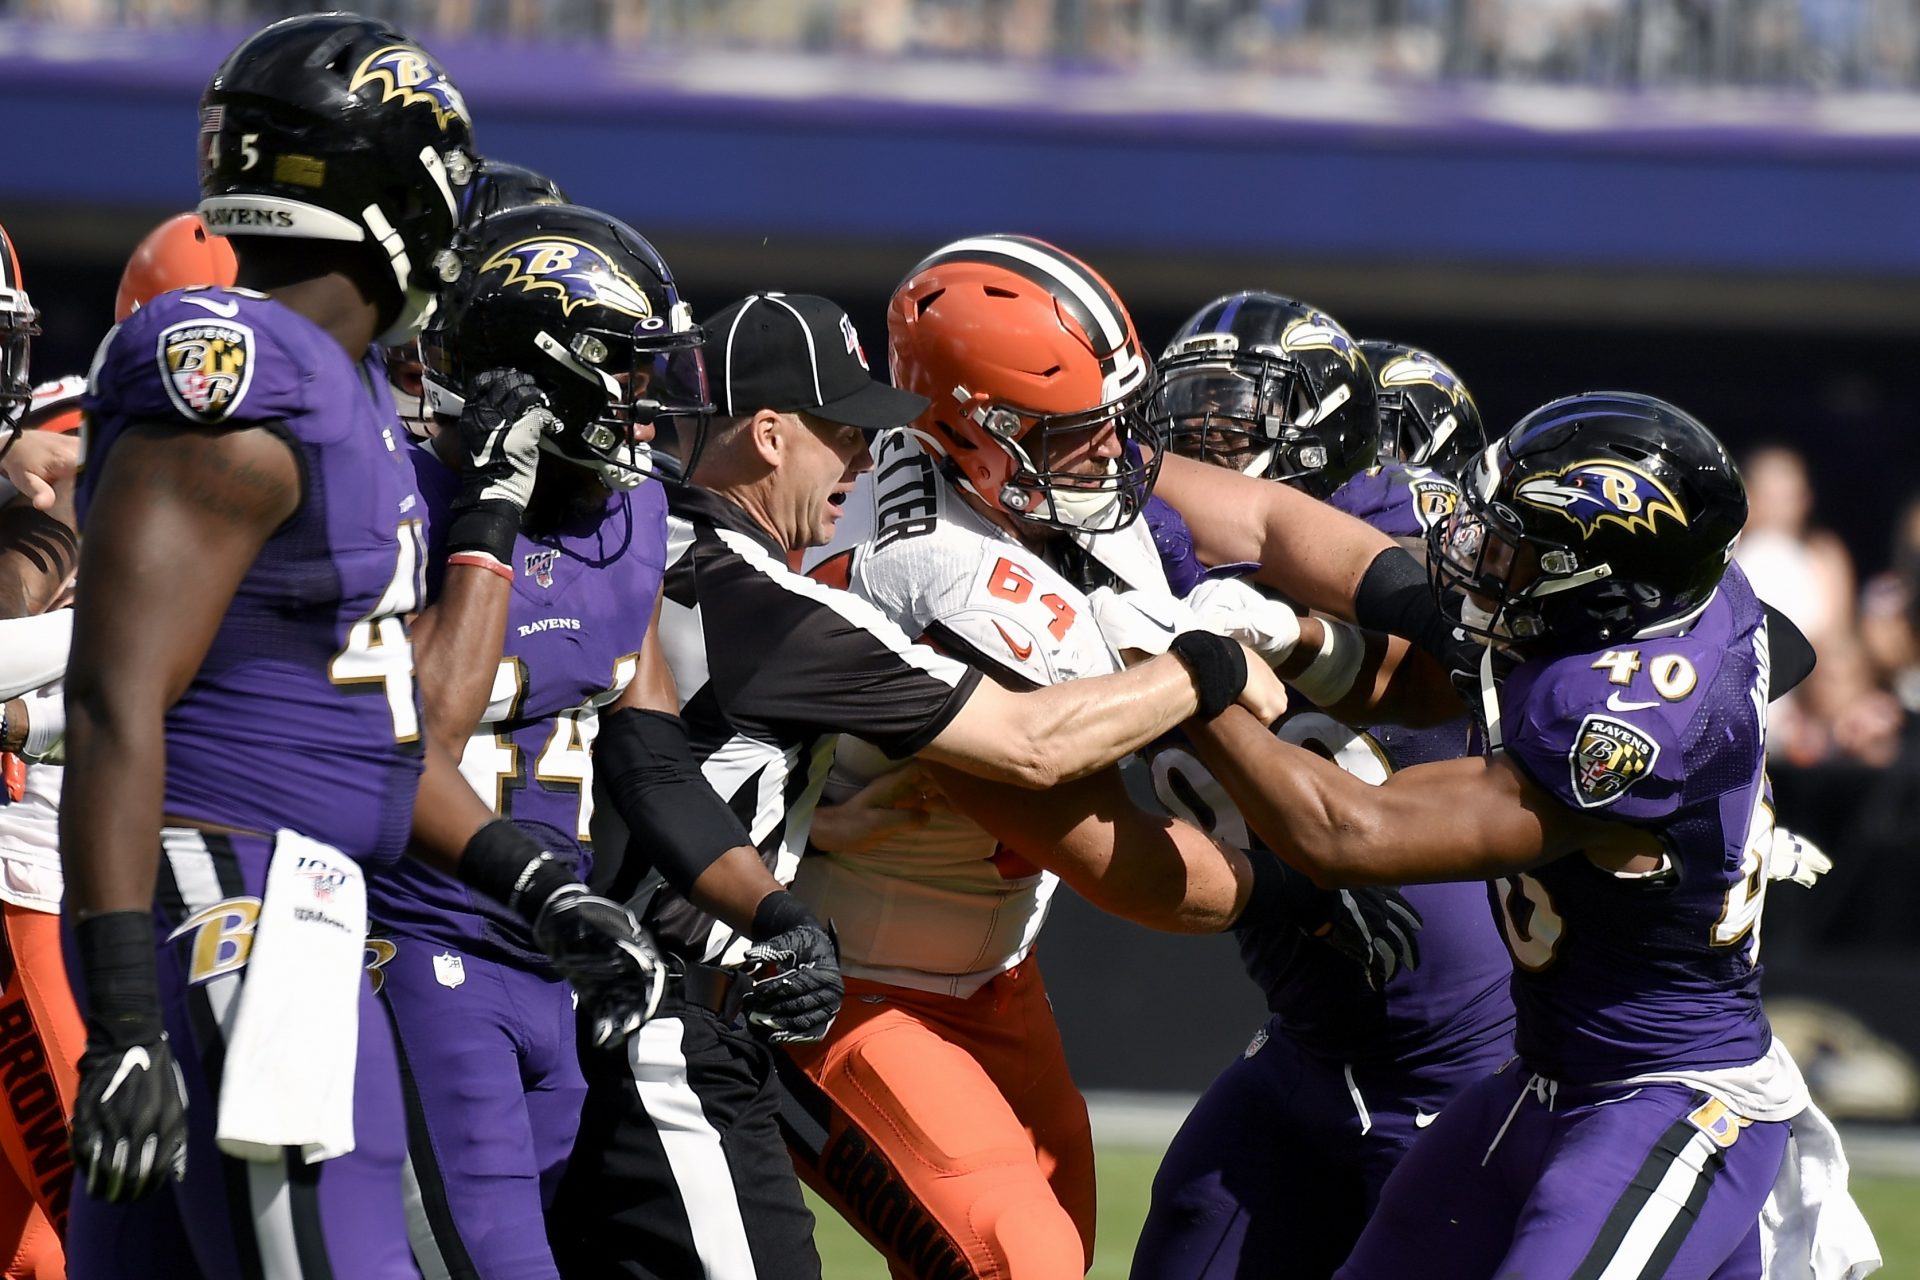 Cleveland Browns center JC Tretter (64) scuffles with Baltimore Ravens inside linebacker Kenny Young (40) during the second half of an NFL football game Sunday, Sept. 29, 2019, in Baltimore.